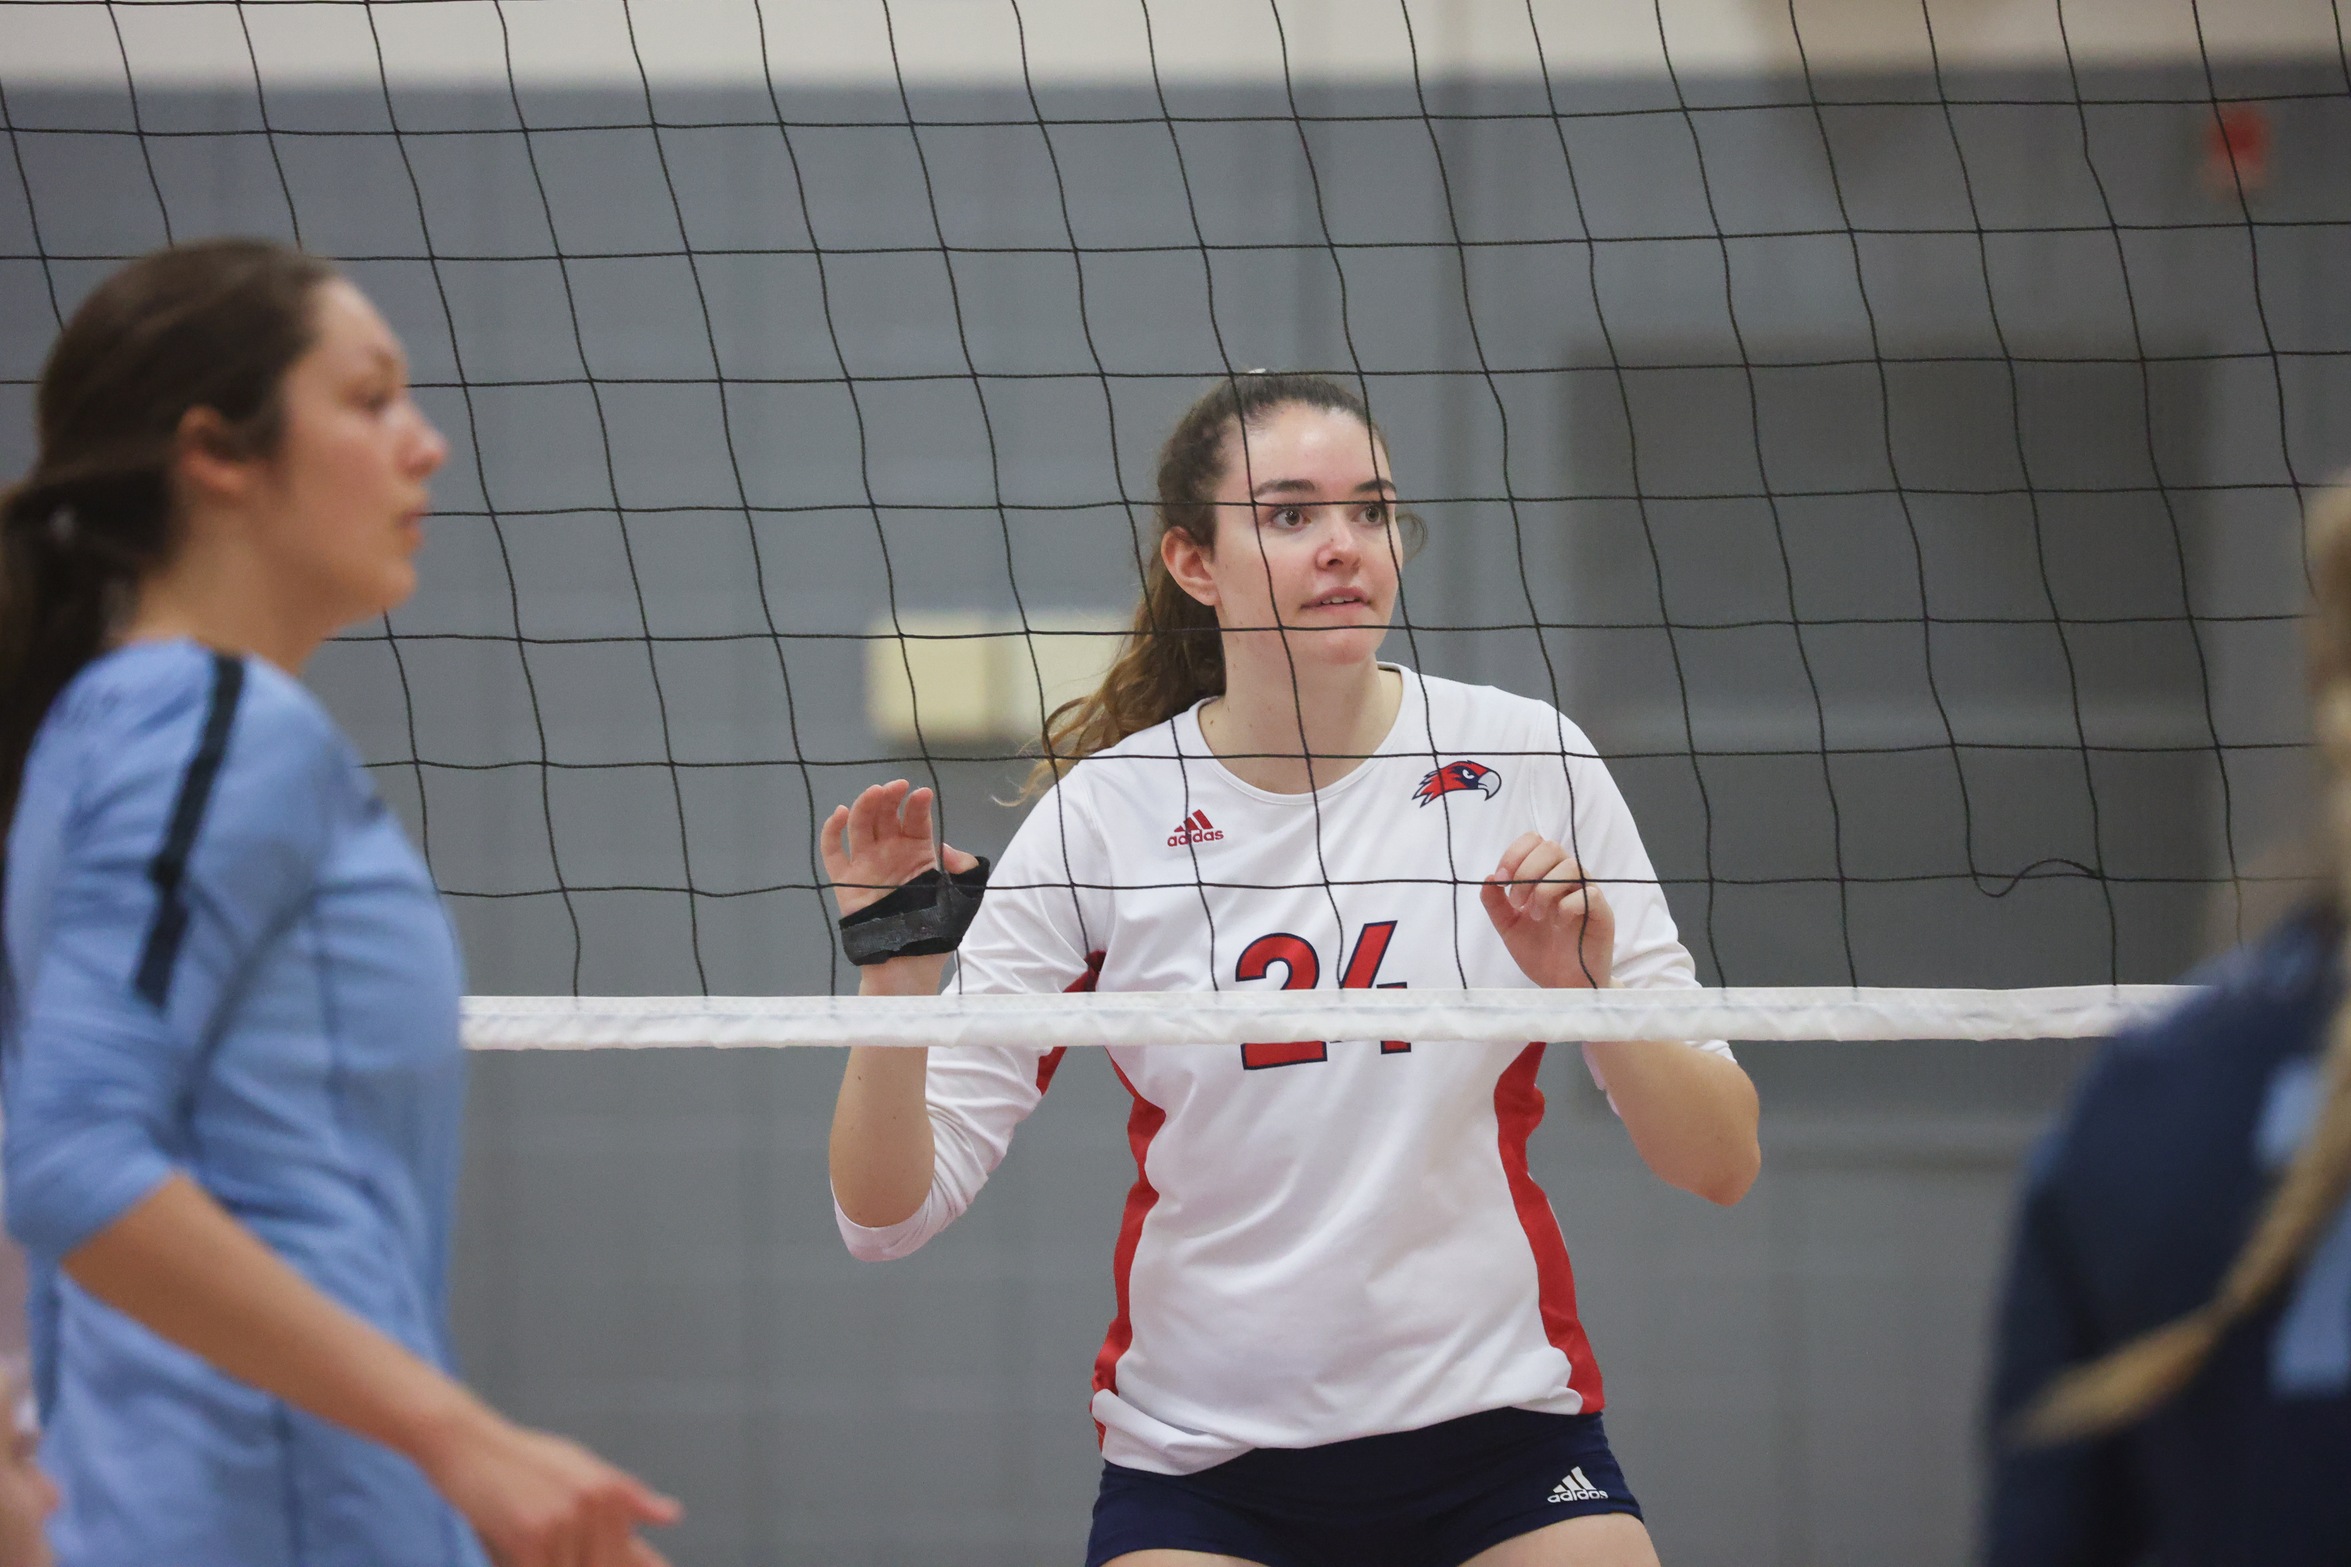 Women's Volleyball kicks off nationals with sweep over IU-South Bend